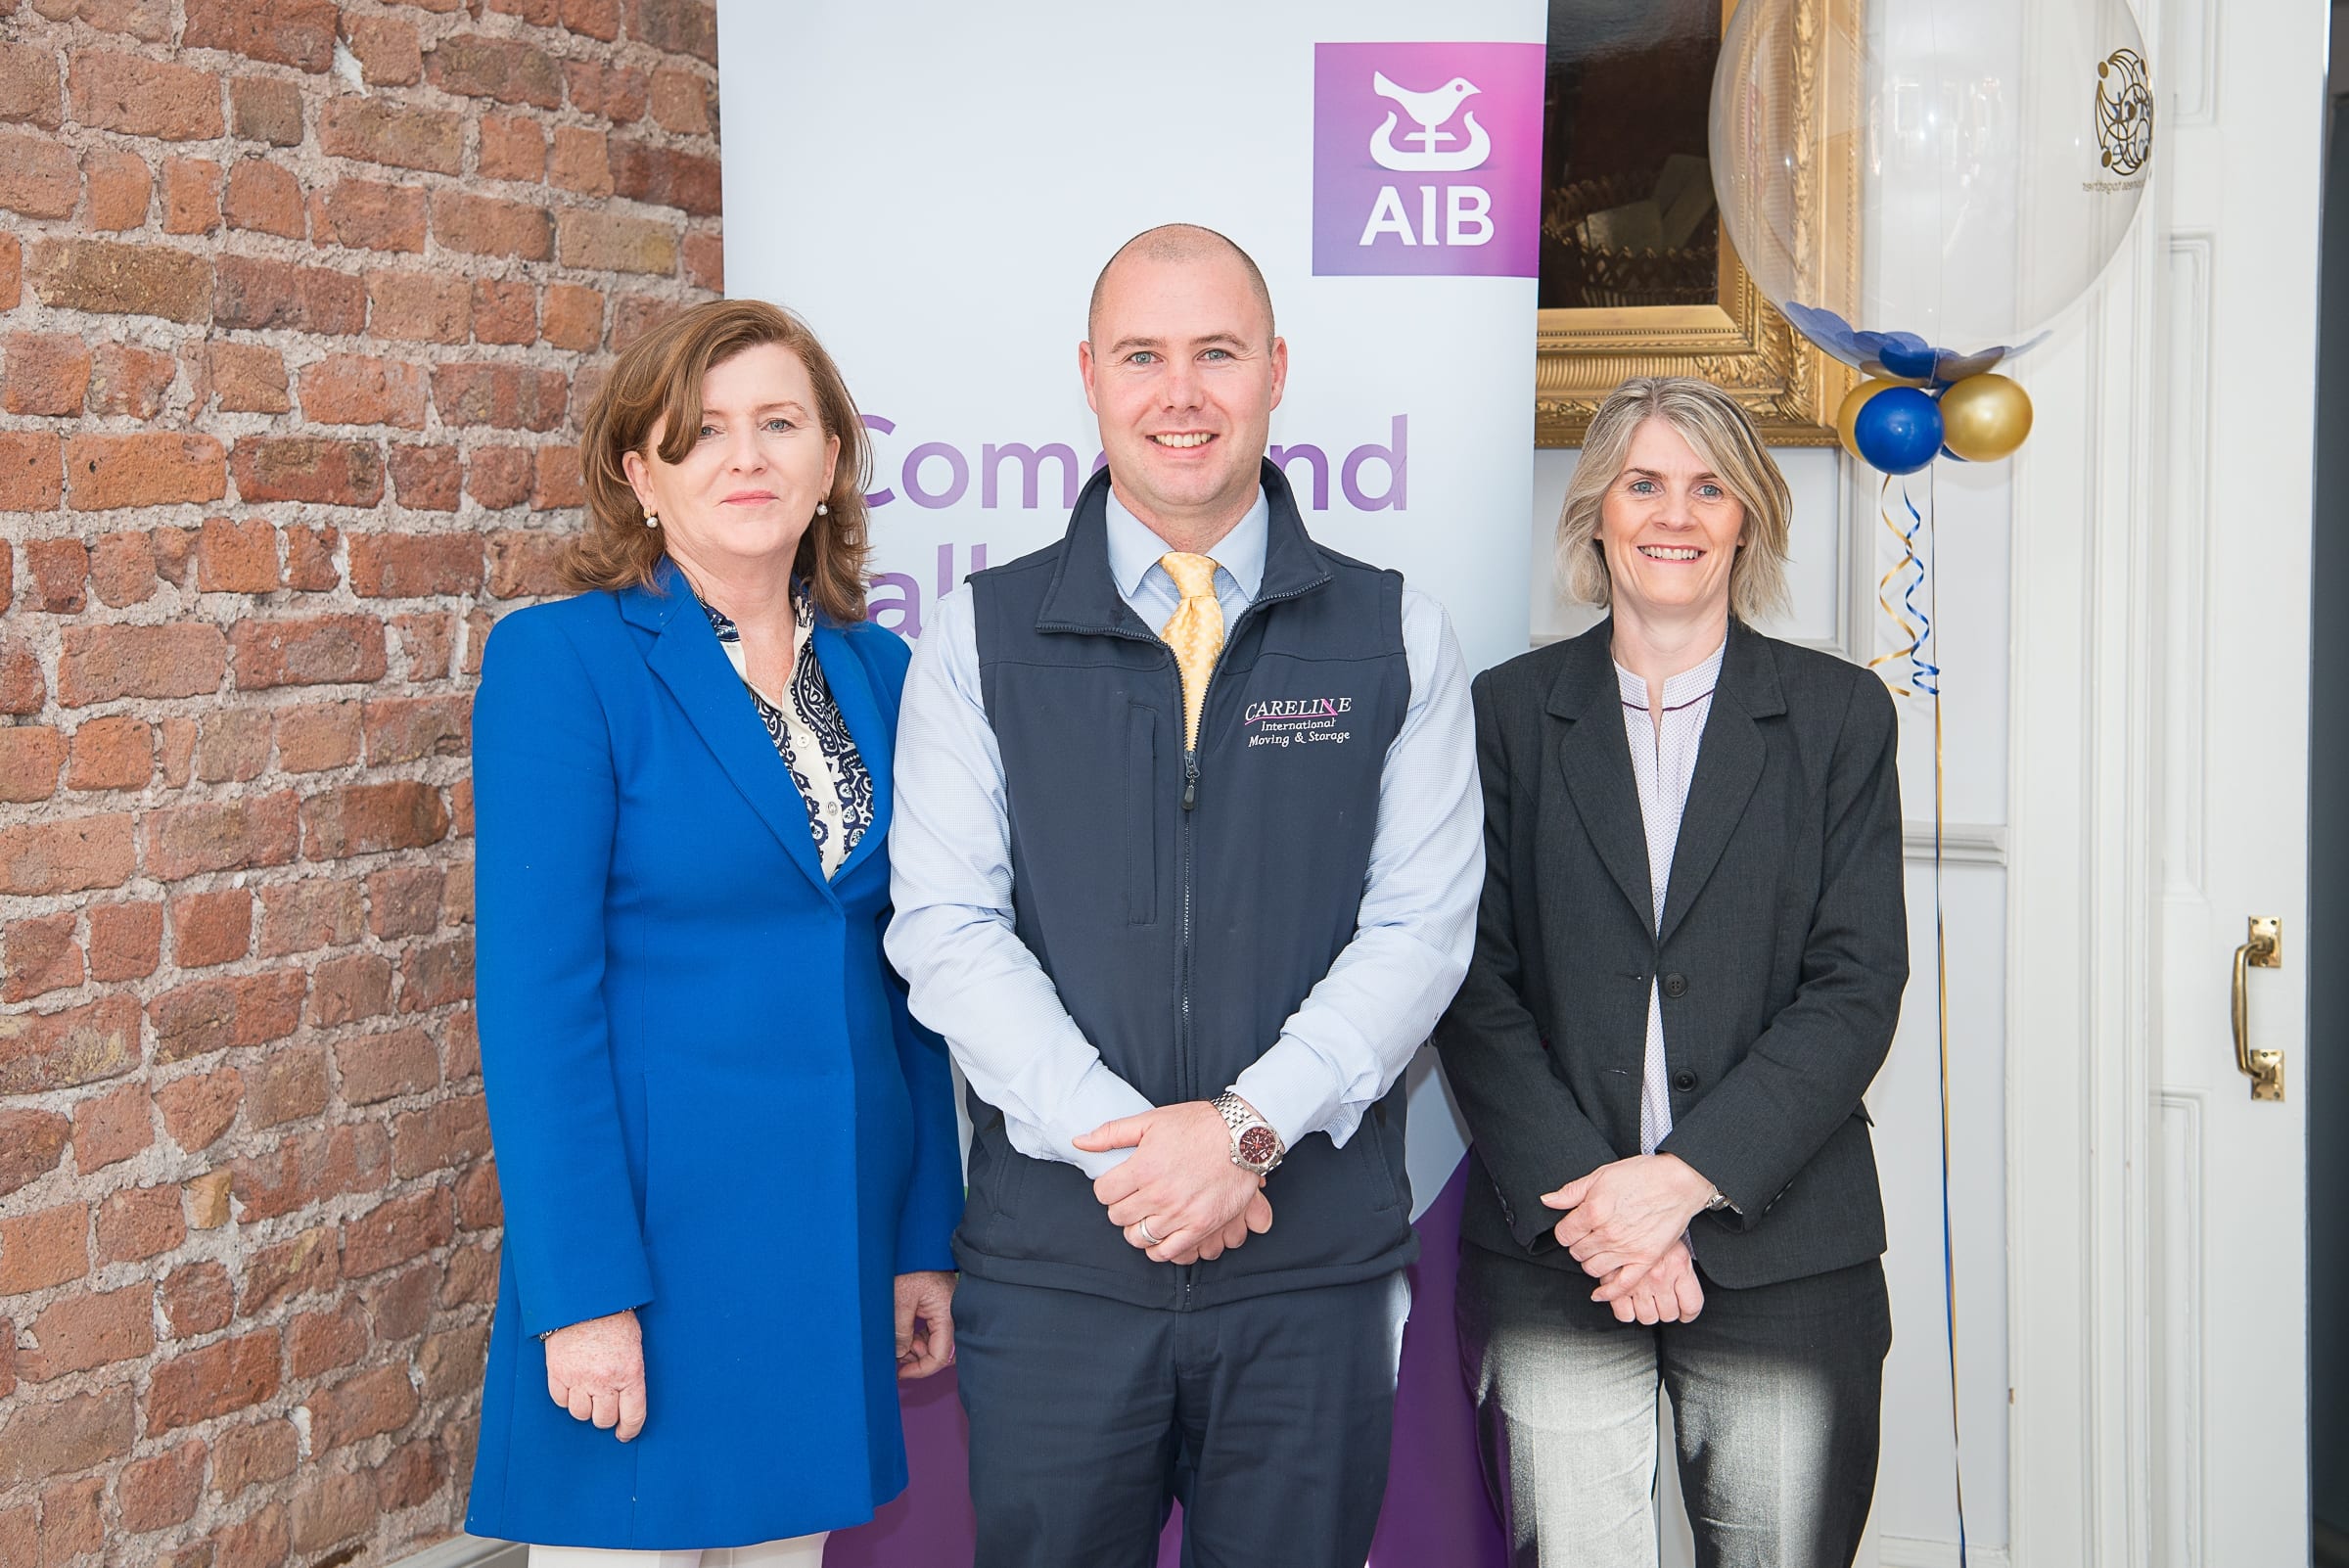 no repro fee- 
From Left to Right:  New Members Breakfast which took place on the 7th June in the Limerick Chamber Boardroom:  Patricia Hough - Limerick and Clare Education and Training Board, Stuart Carey - Careline Moving and Storage, Mary Harrington - AIB.
Photo by Morning Star Photography